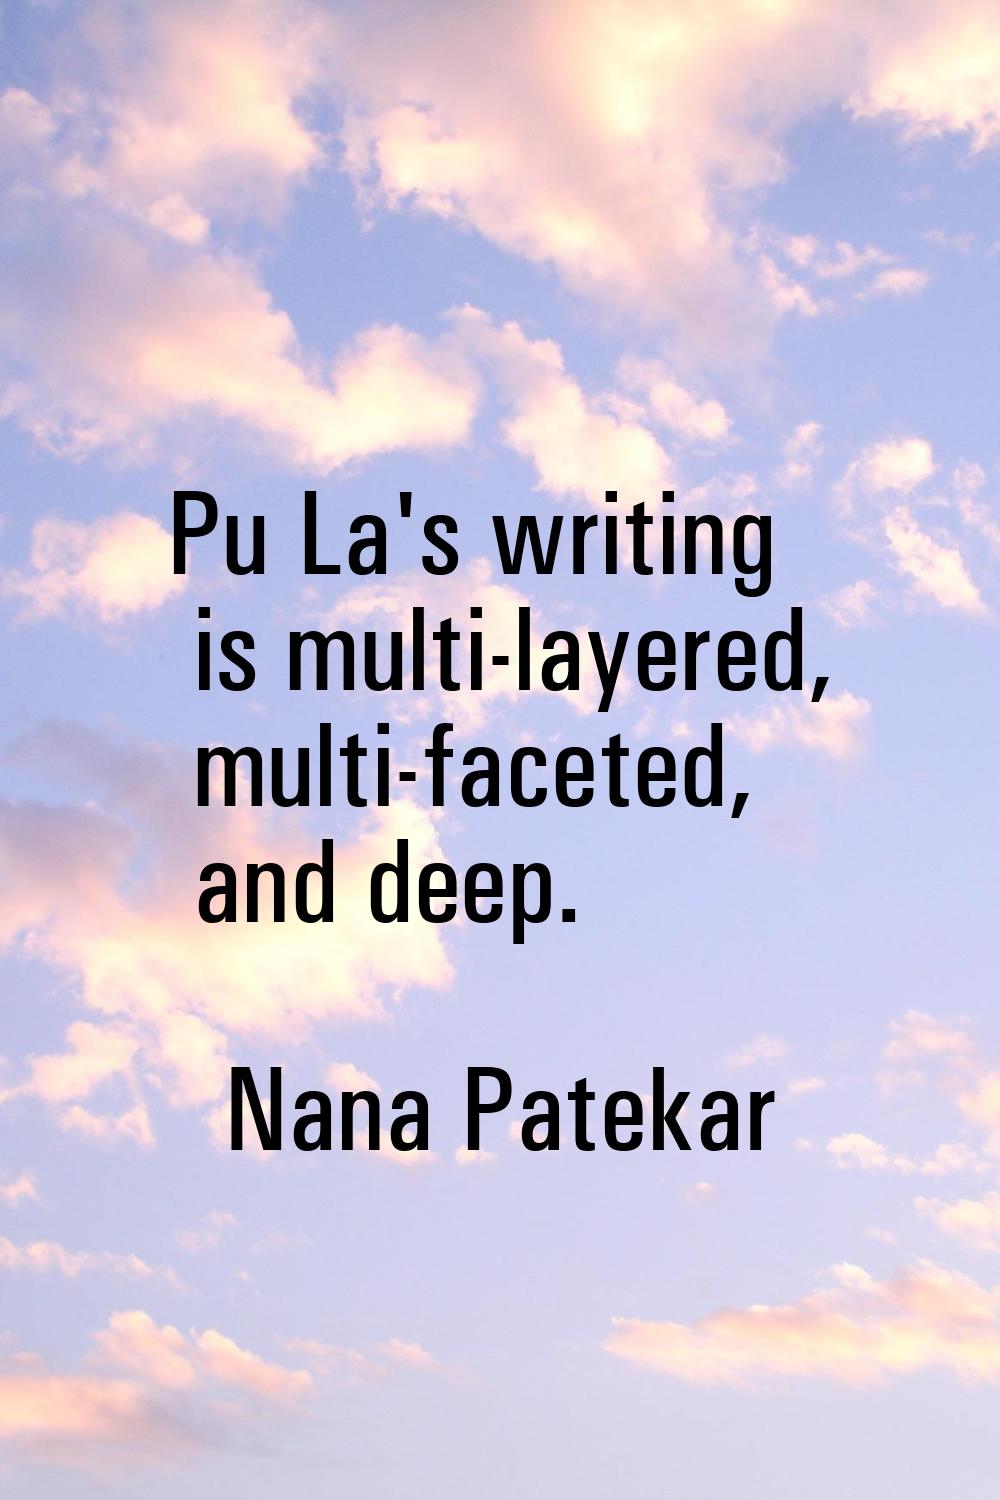 Pu La's writing is multi-layered, multi-faceted, and deep.